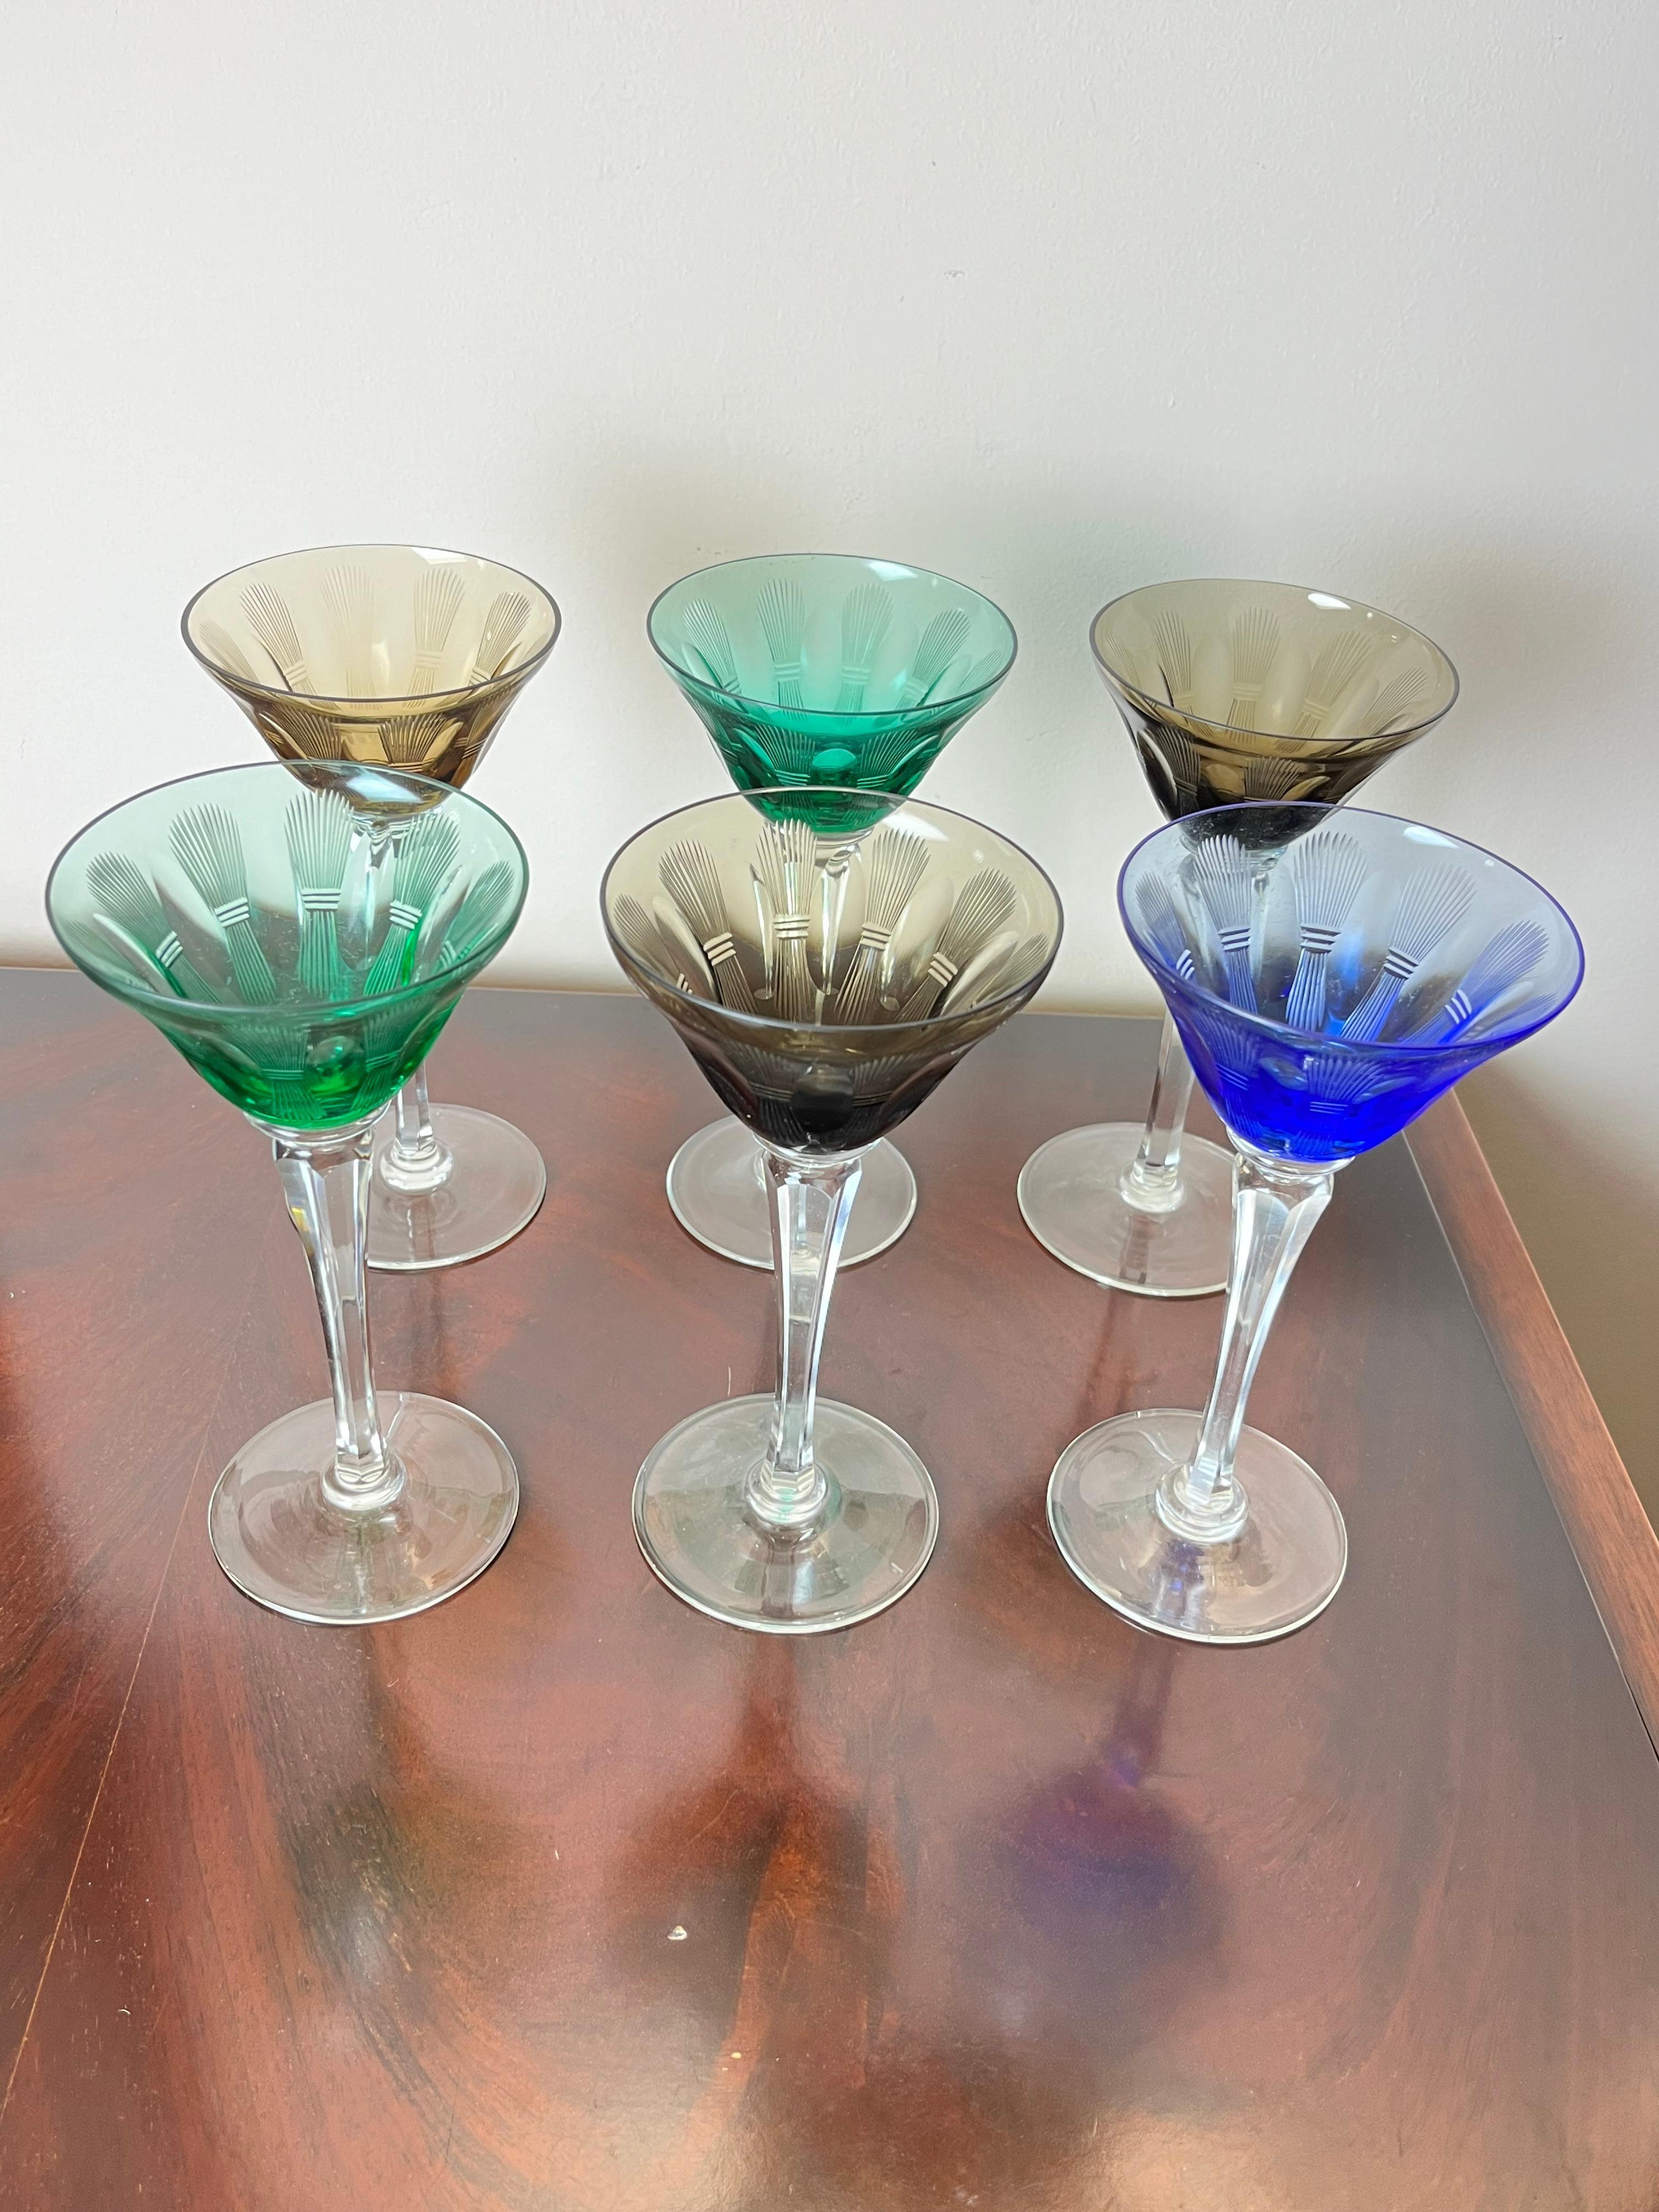 Set of 6 Colored Crystal Glasses, Italy, 1950s For Sale 6